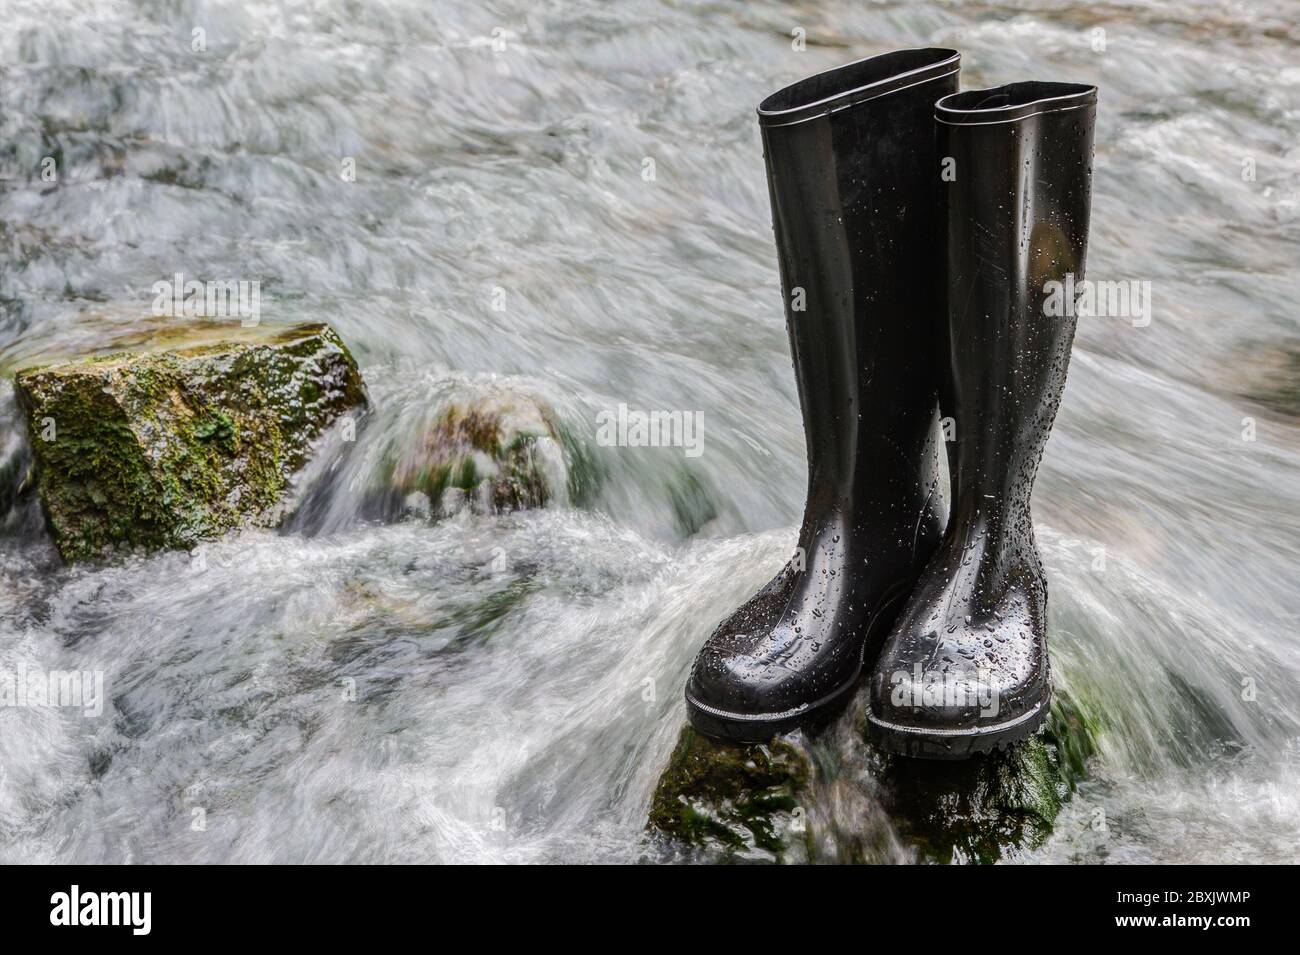 Black rubber boots stand on a stone in the rushing water of a creek.In wet and damp terrain you always have dry feet with rubber boots. Stock Photo